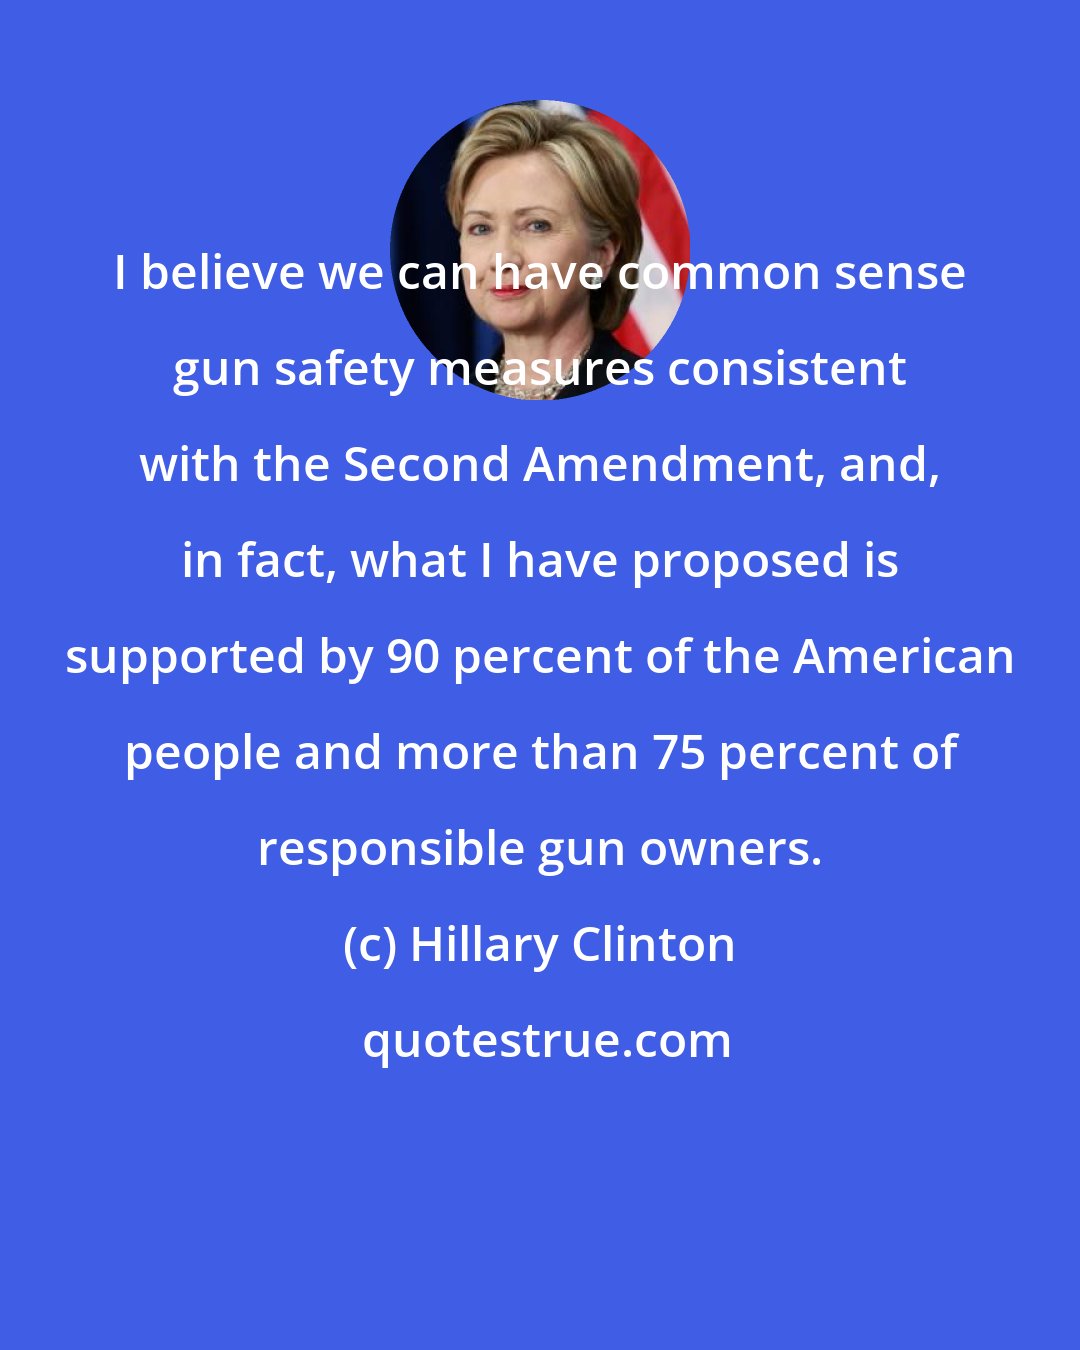 Hillary Clinton: I believe we can have common sense gun safety measures consistent with the Second Amendment, and, in fact, what I have proposed is supported by 90 percent of the American people and more than 75 percent of responsible gun owners.